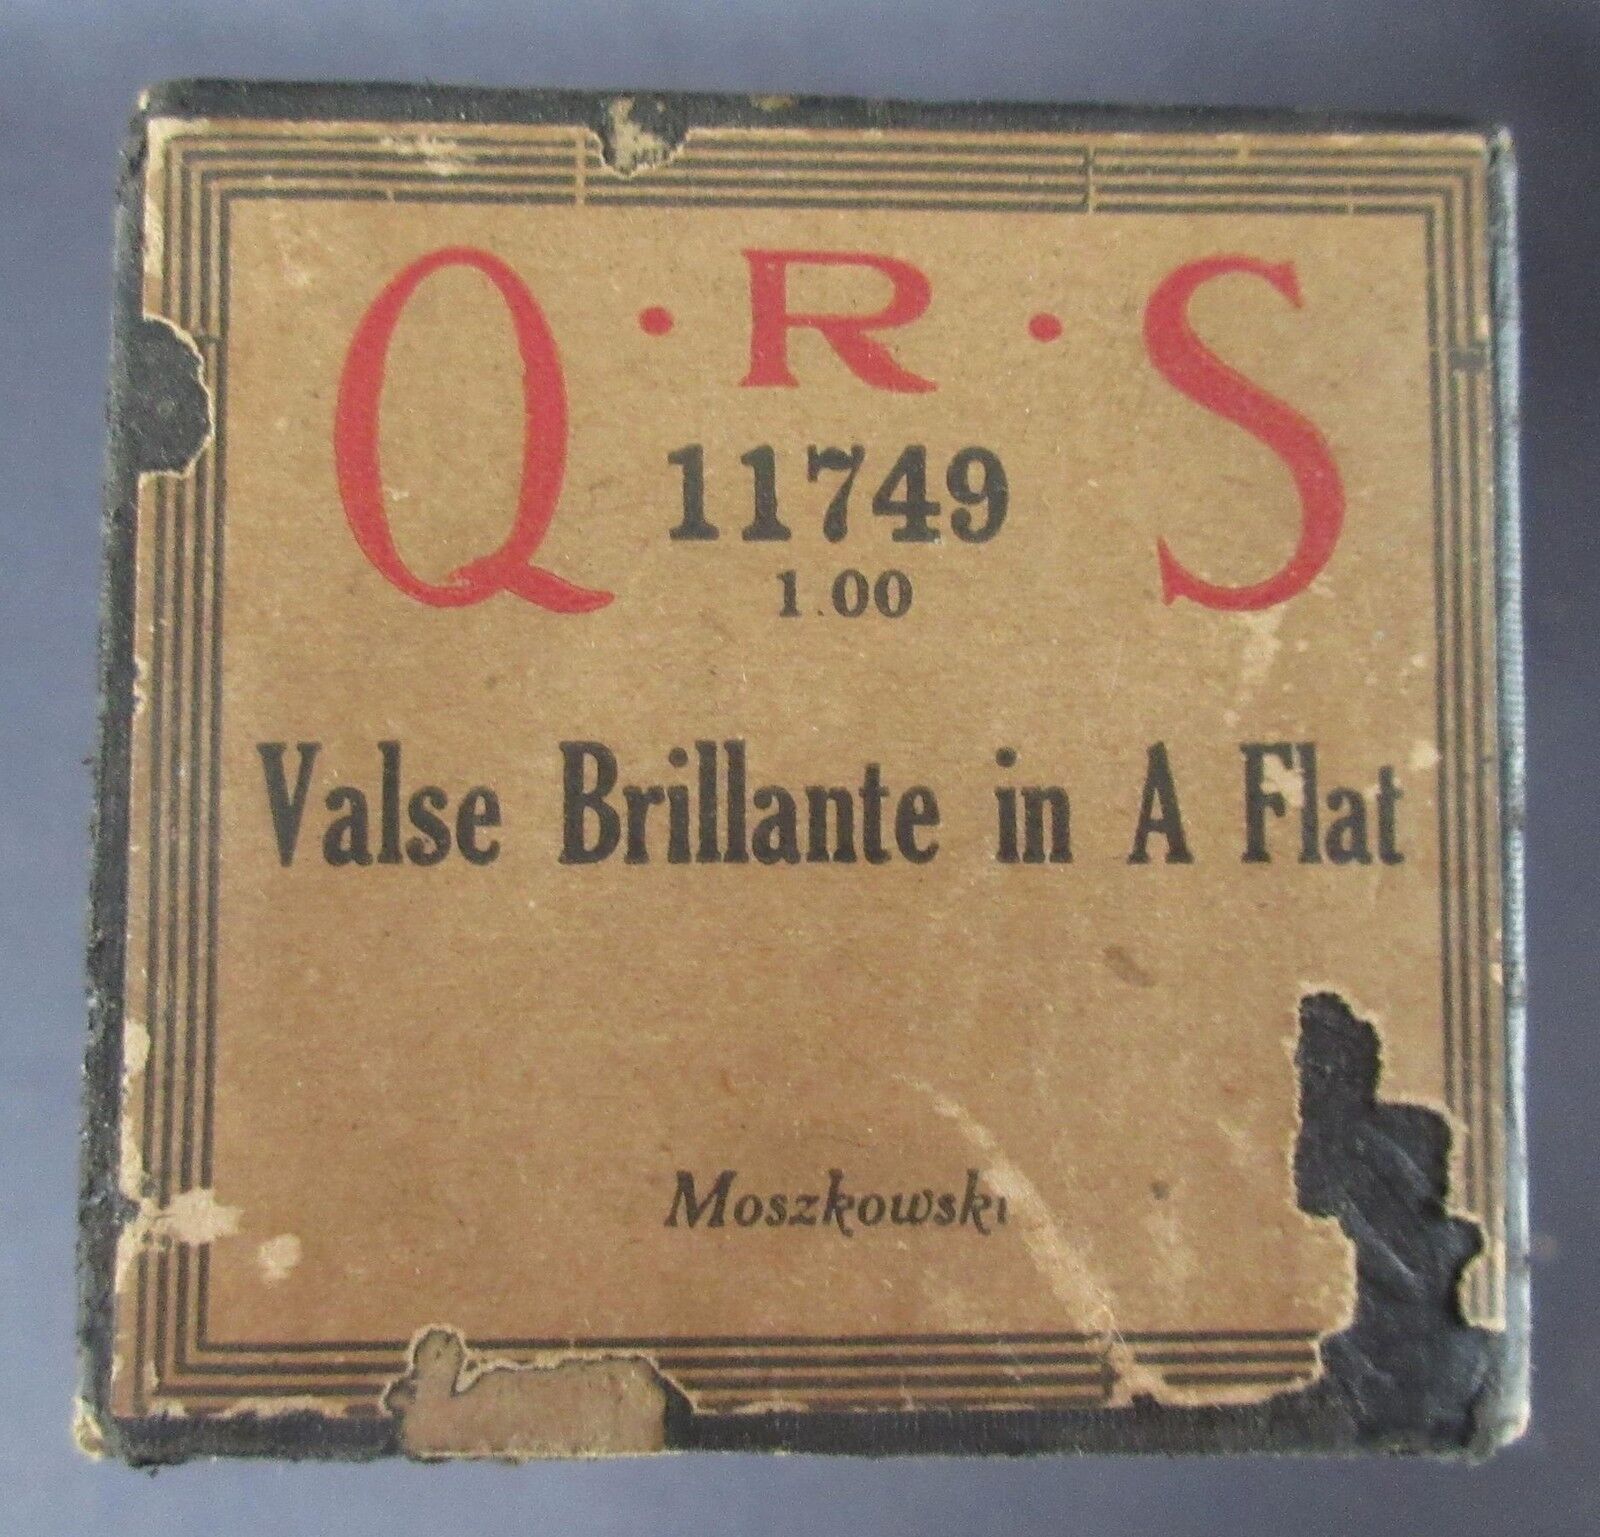 Q R S Player Piano Roll 